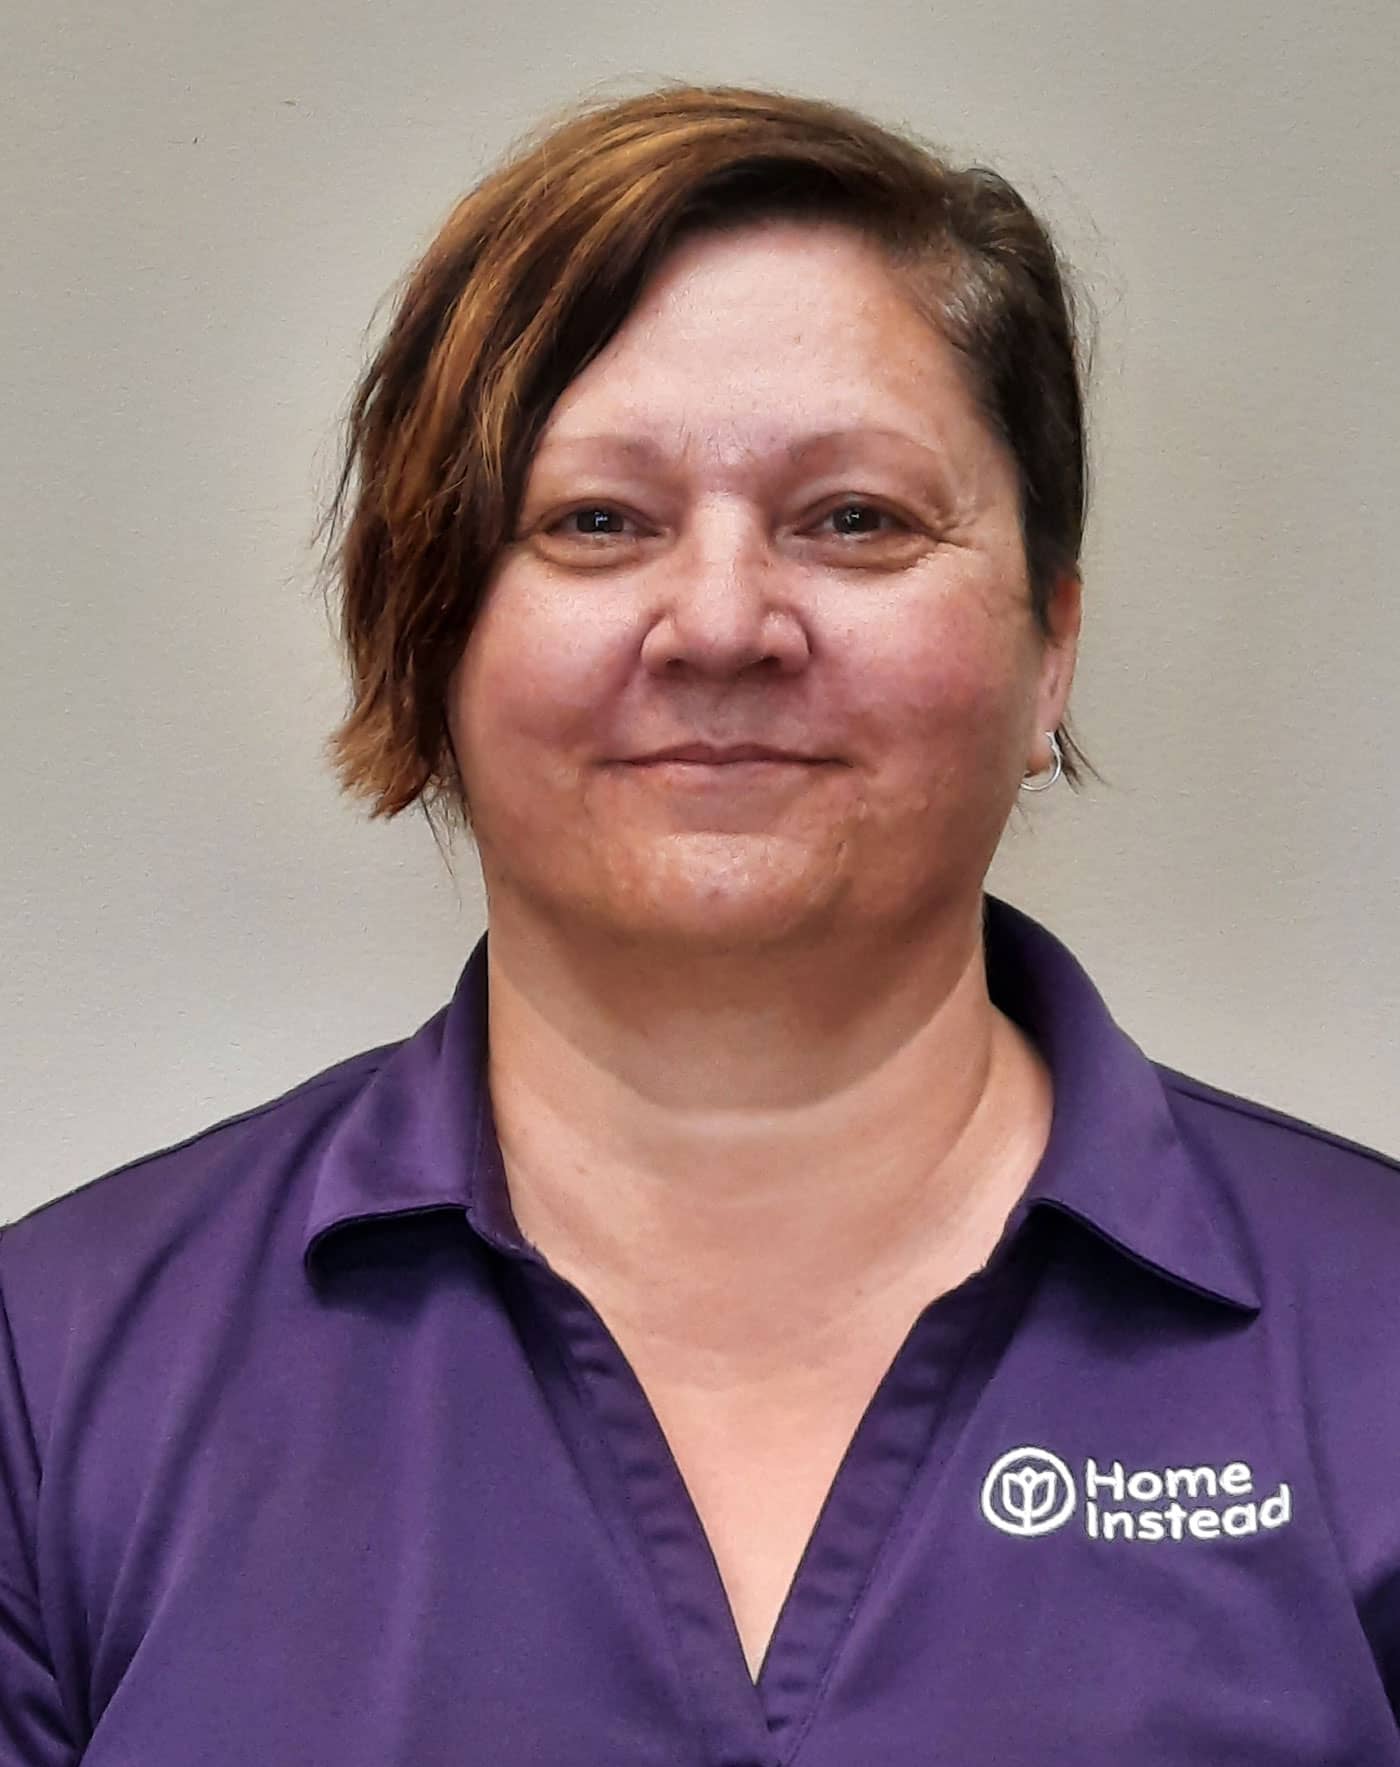 Phyllis E; Care Professional of the Month - July 2022